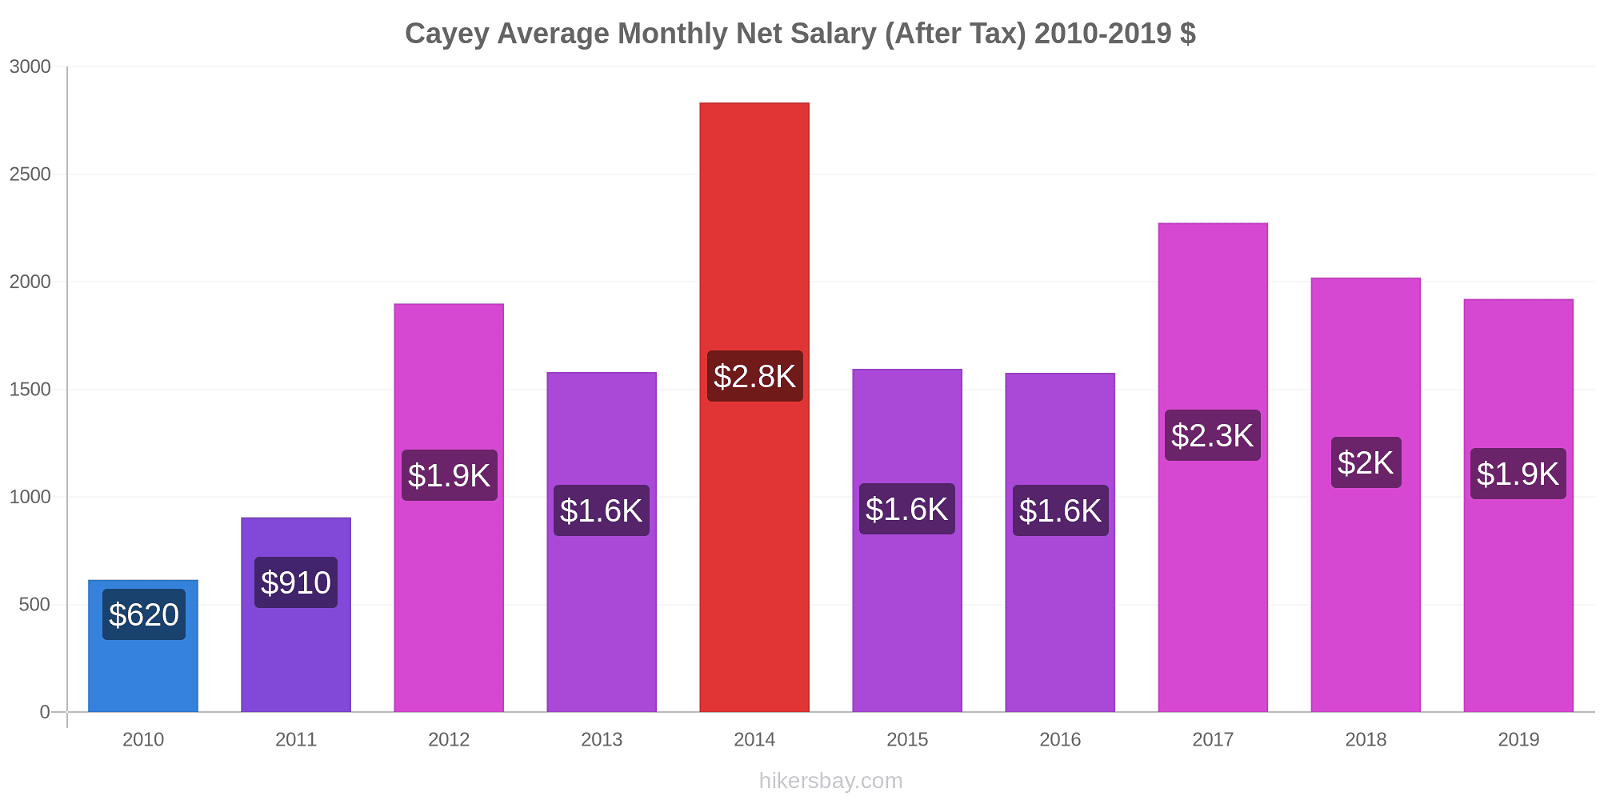 Cayey price changes Average Monthly Net Salary (After Tax) hikersbay.com